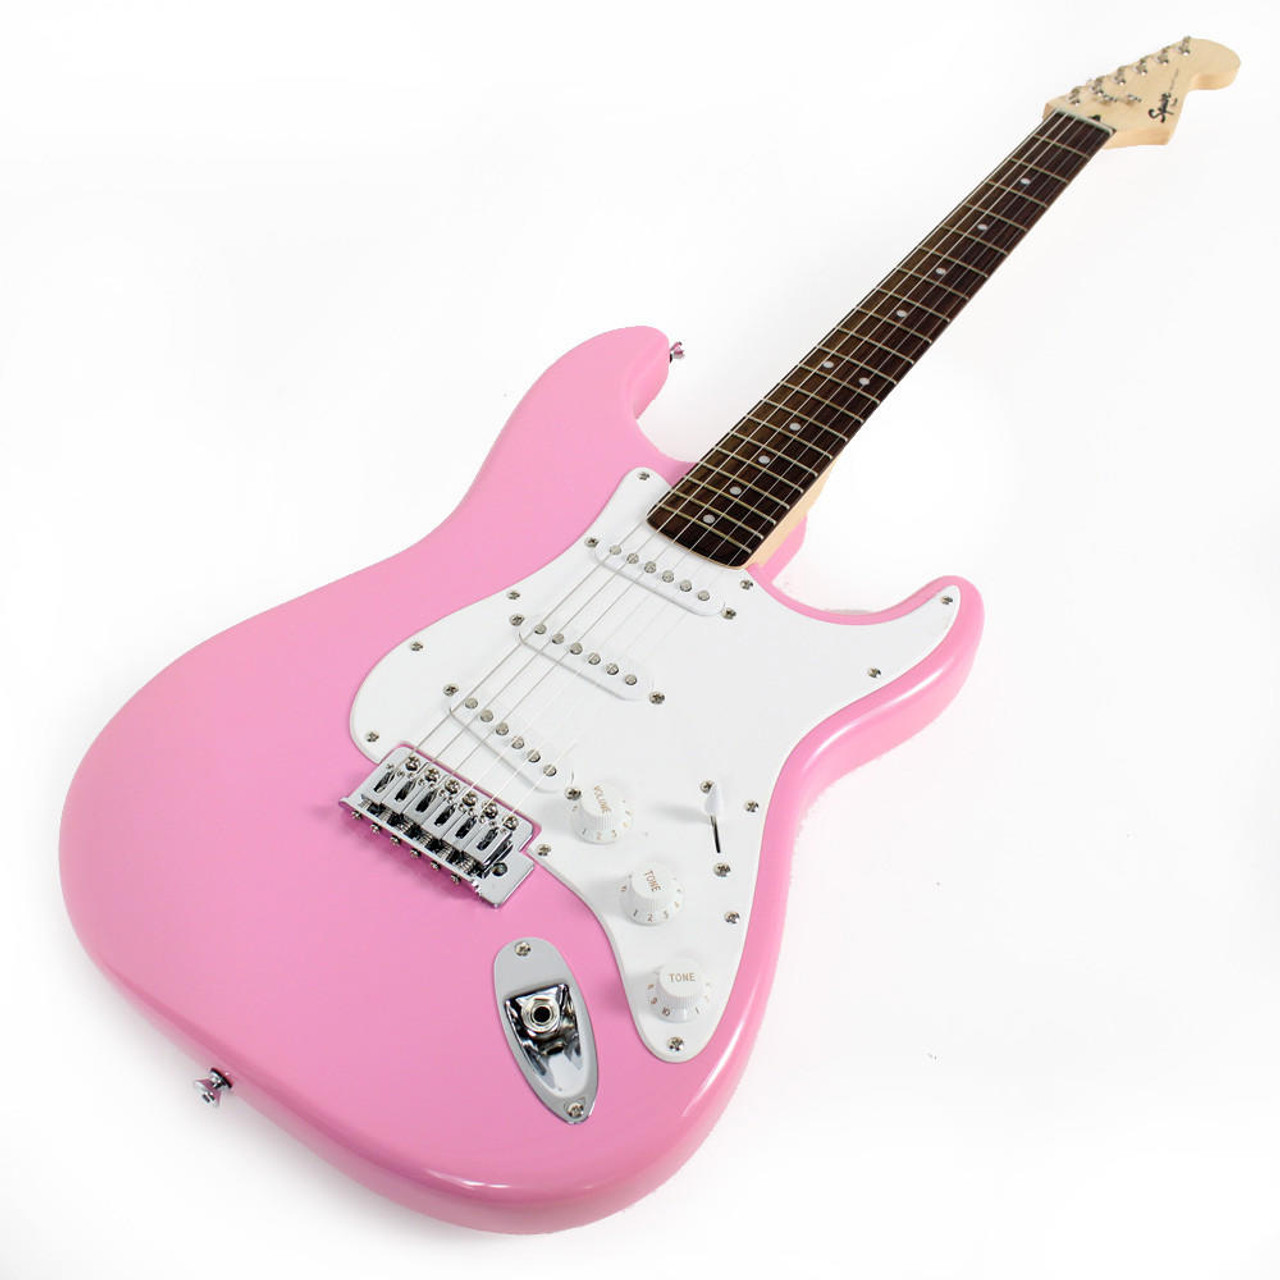 Squier Bullet Stratocaster Electric Guitar in Pink Finish